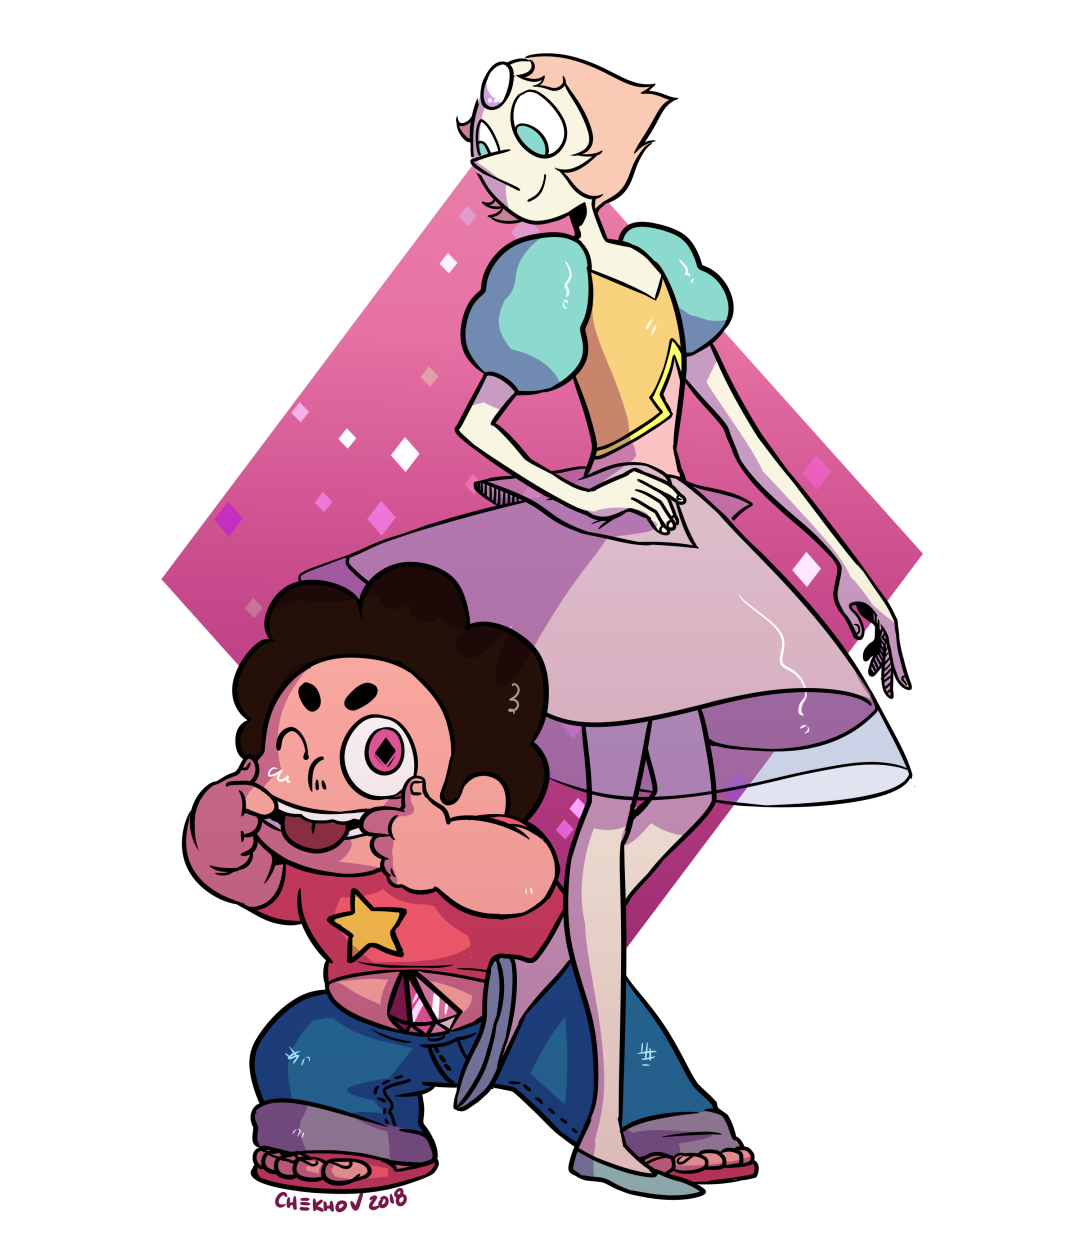 I’ve seen a lot of Momswap stuff with Steven and Pearls recently! I really enjoy it, so I ended up drawing Steven Bluniverse…. and then thought “why stop there?” Here’s the whole entourage! Don’t...